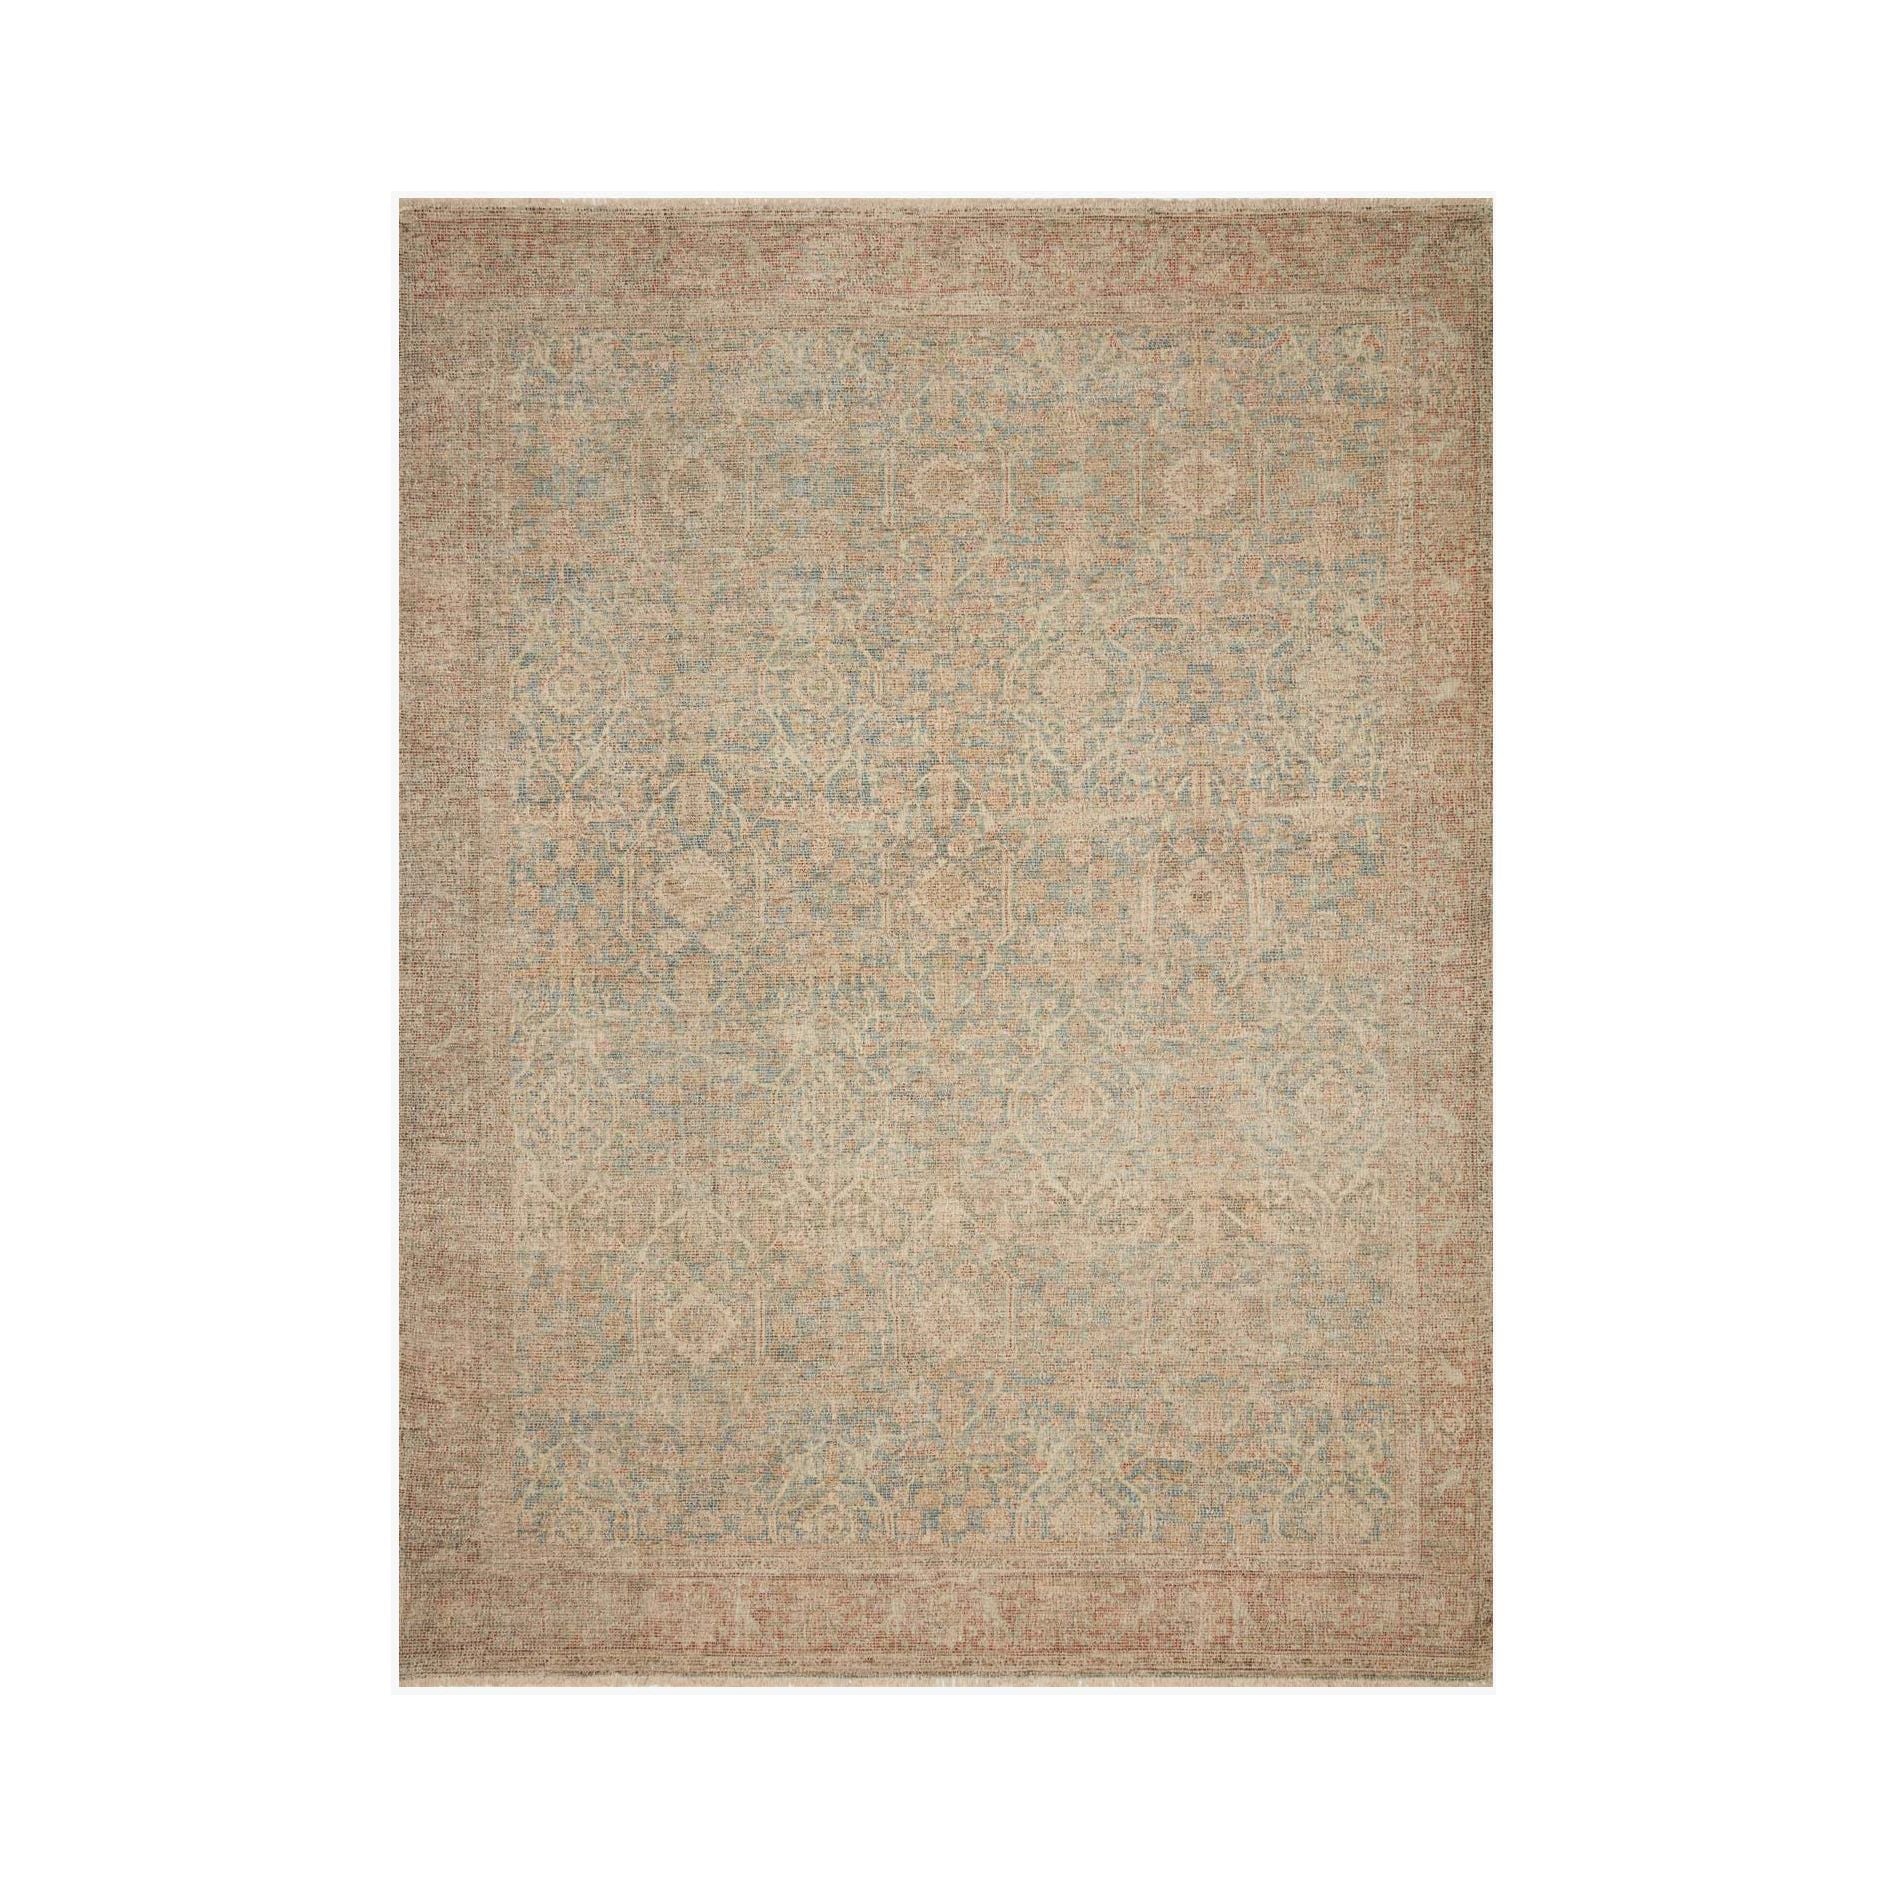 Hand-woven by skilled artisans, the Priya Denim / Rust Area Rug from Loloi offers beautiful tonal designs accentuated by a carefully curated color palette. Delicate yet strong, Priya is an instant classic made for today's home.  Hand Woven 51% Cotton | 29% Polyester | 12% Viscose | 8% Wool PRY-06 Denim/Rust Colors: Red, Orange, Ivory, Blue